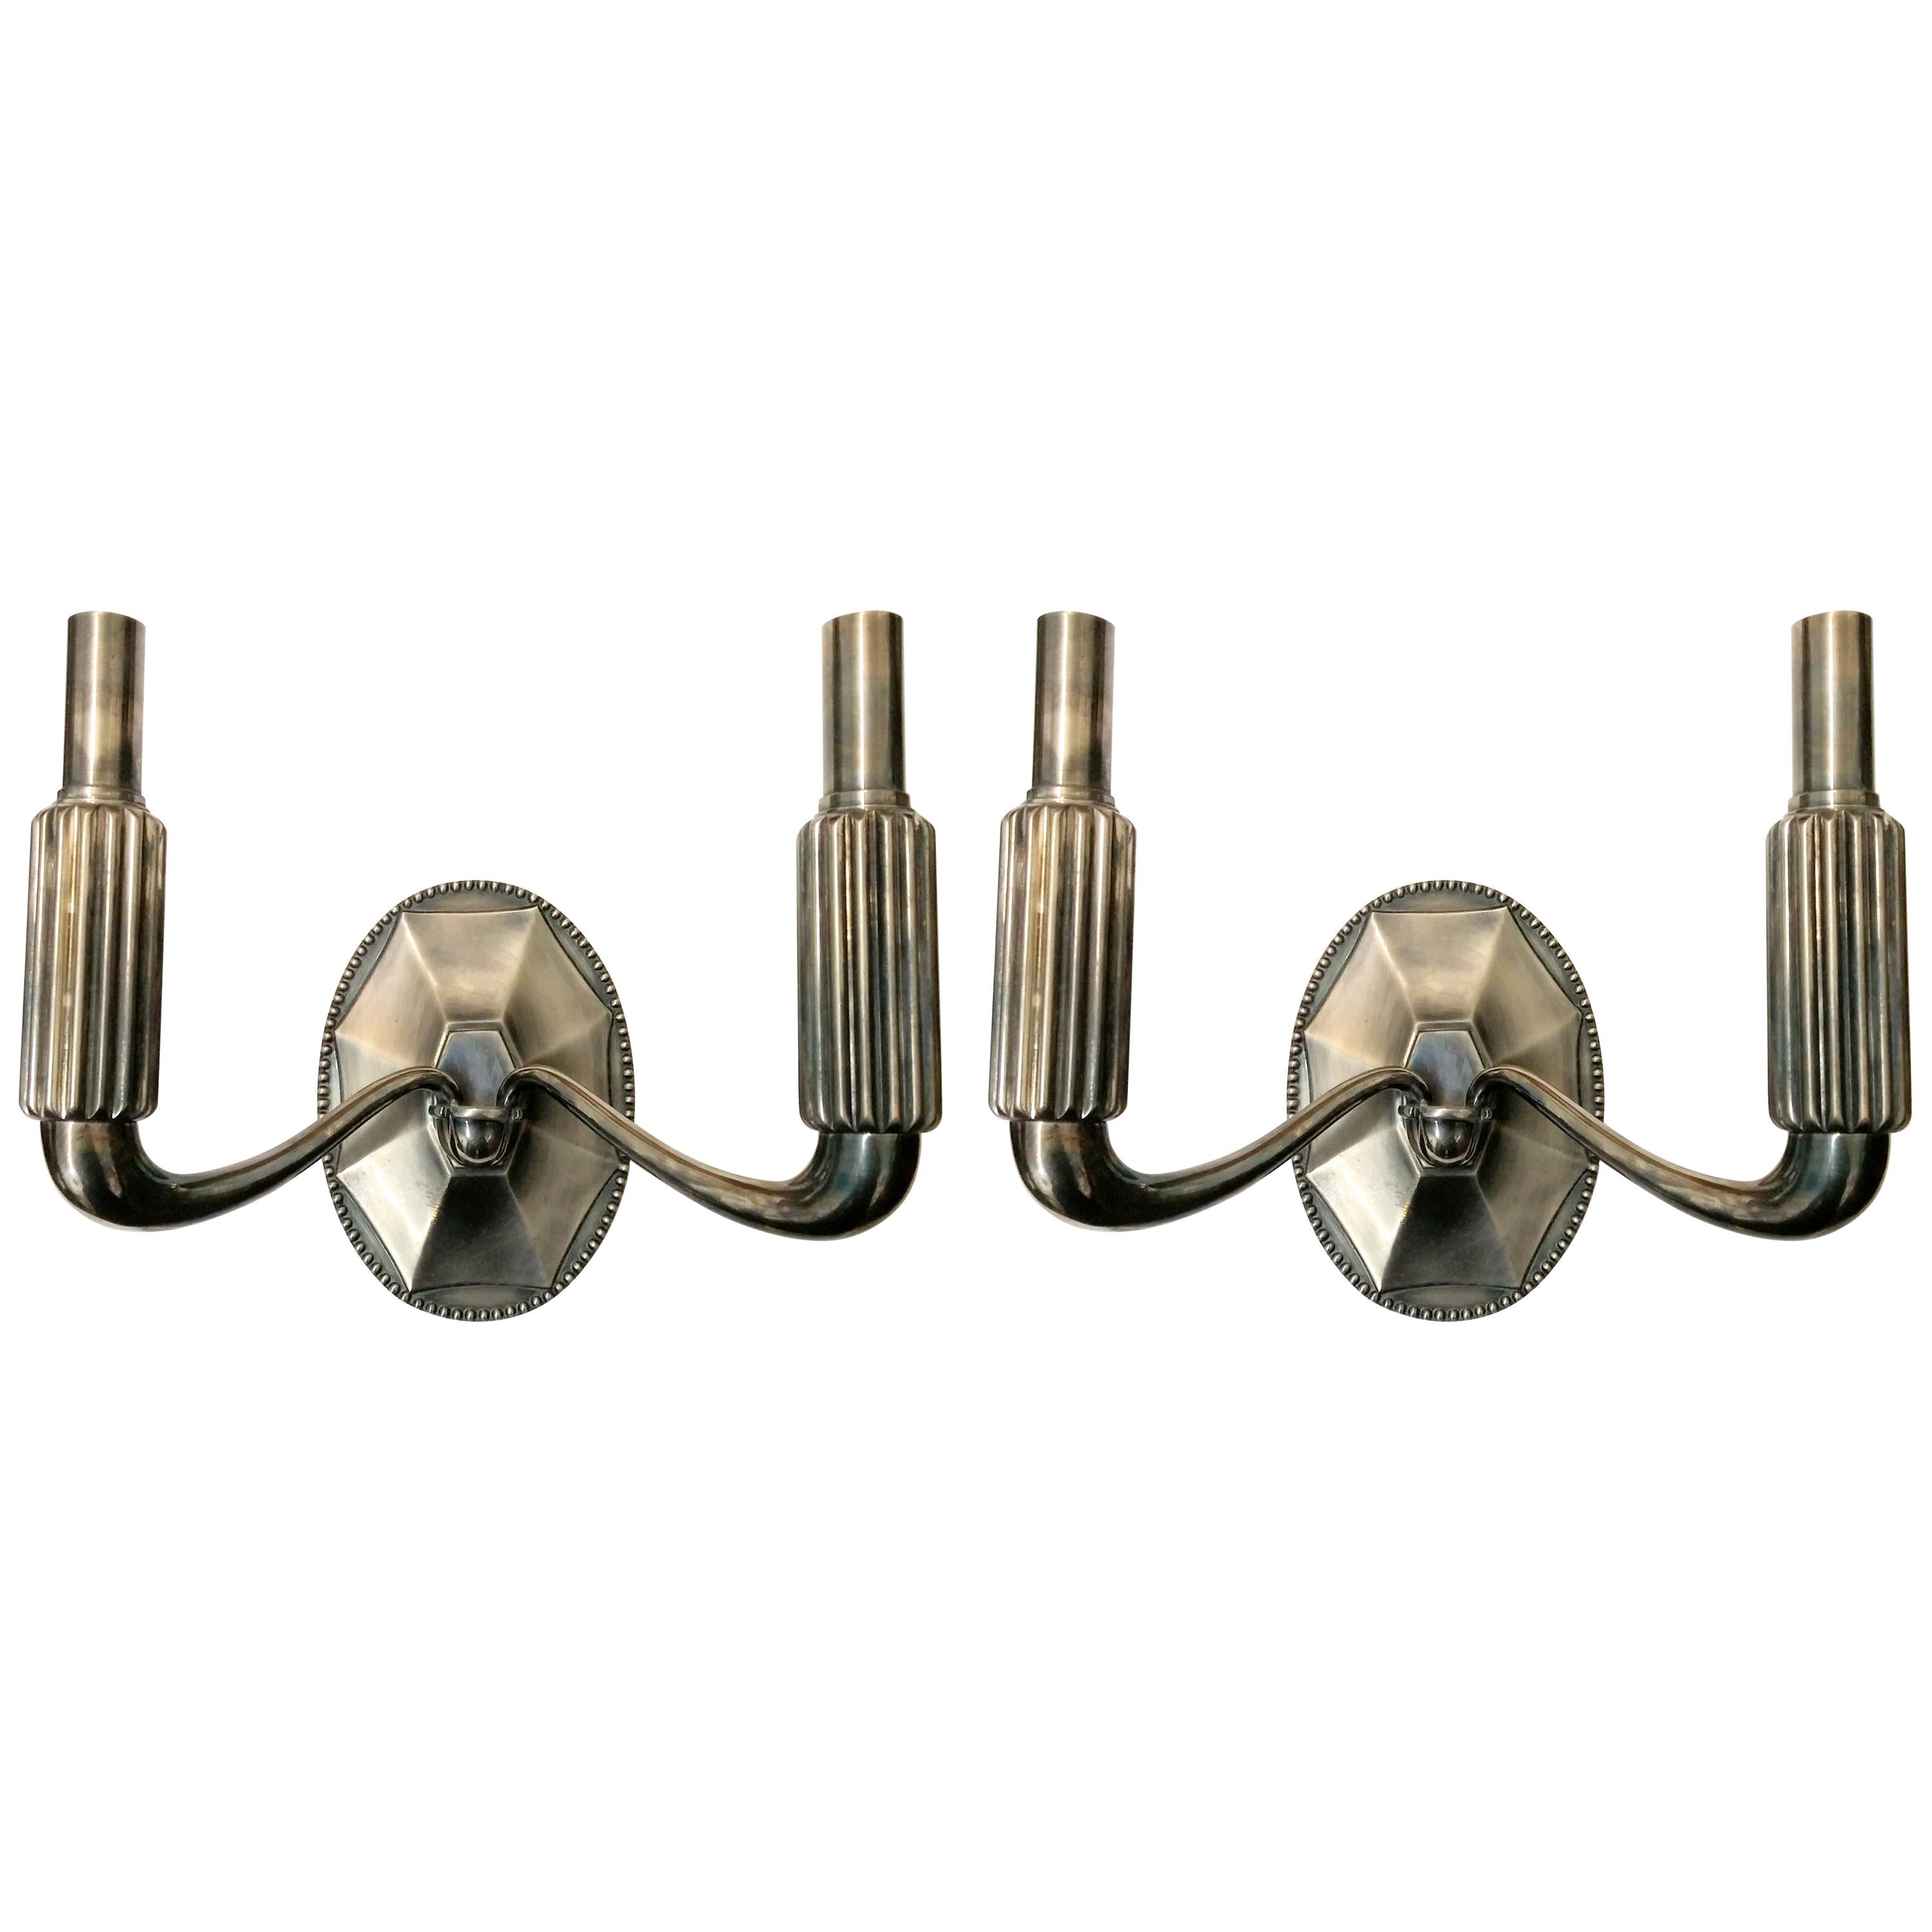 A Pair of Sconces in the Manner of Ruhlmann (2 pairs available)